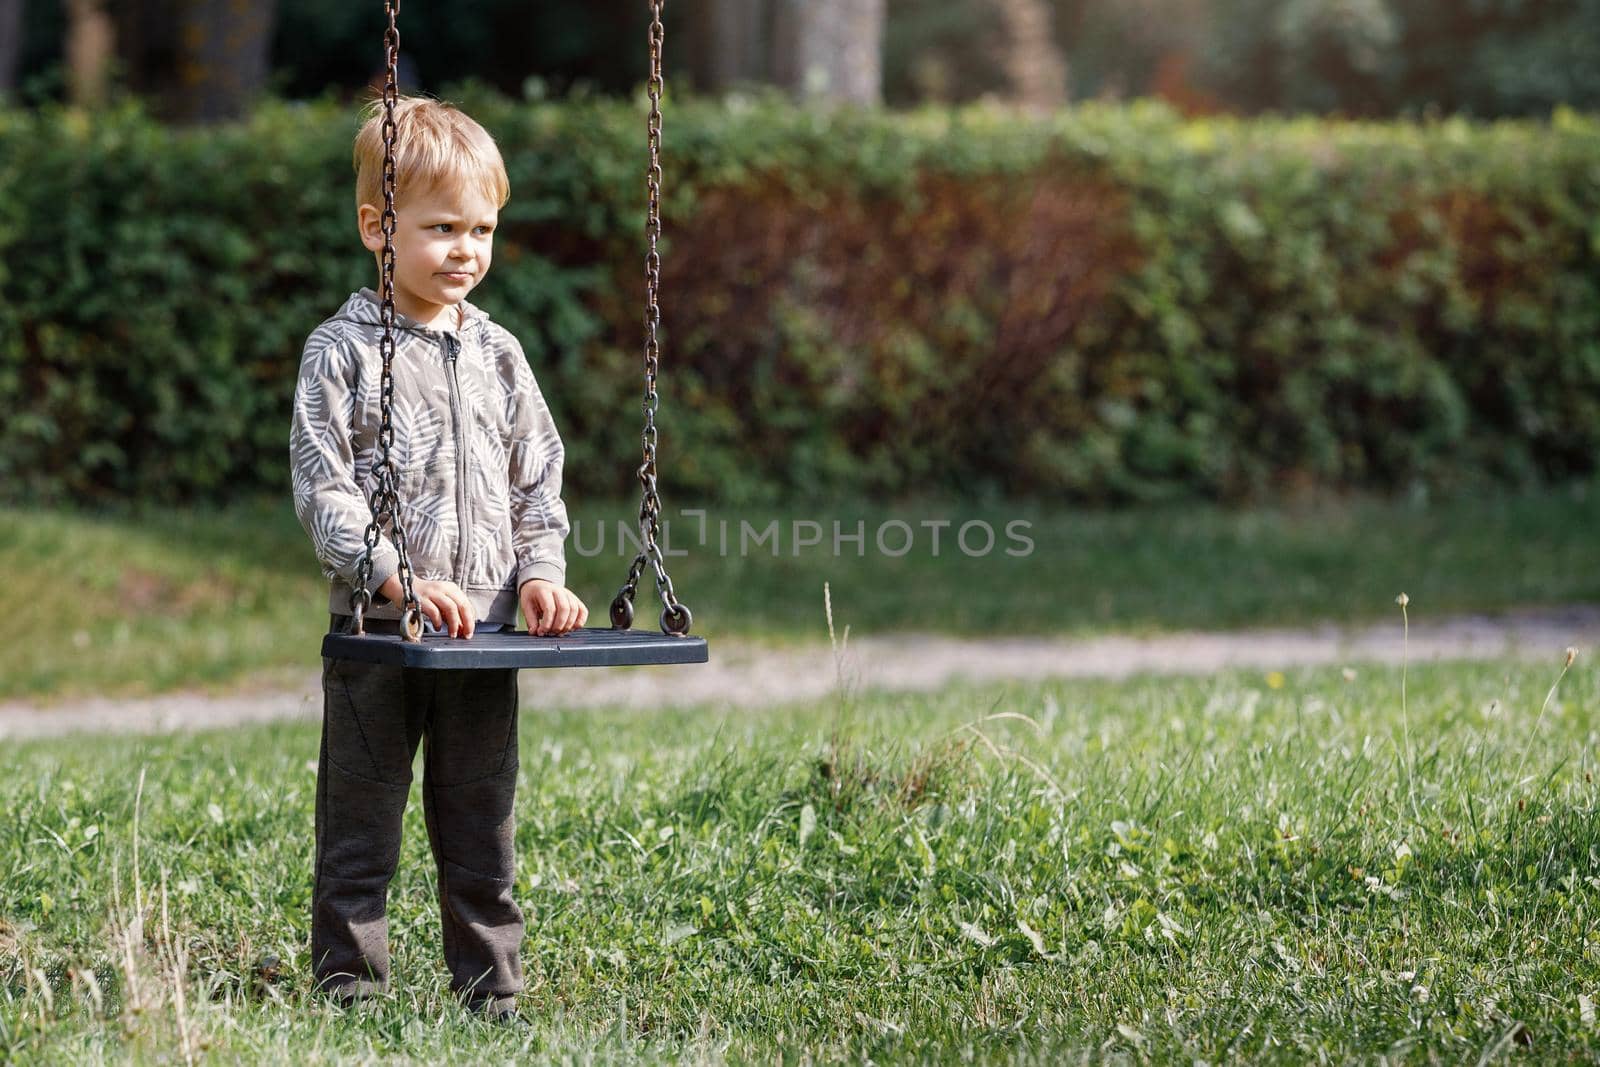 An attractive little boy stands next to a swing with chains in a city park, a child getting ready to swing. Horizontal photo.